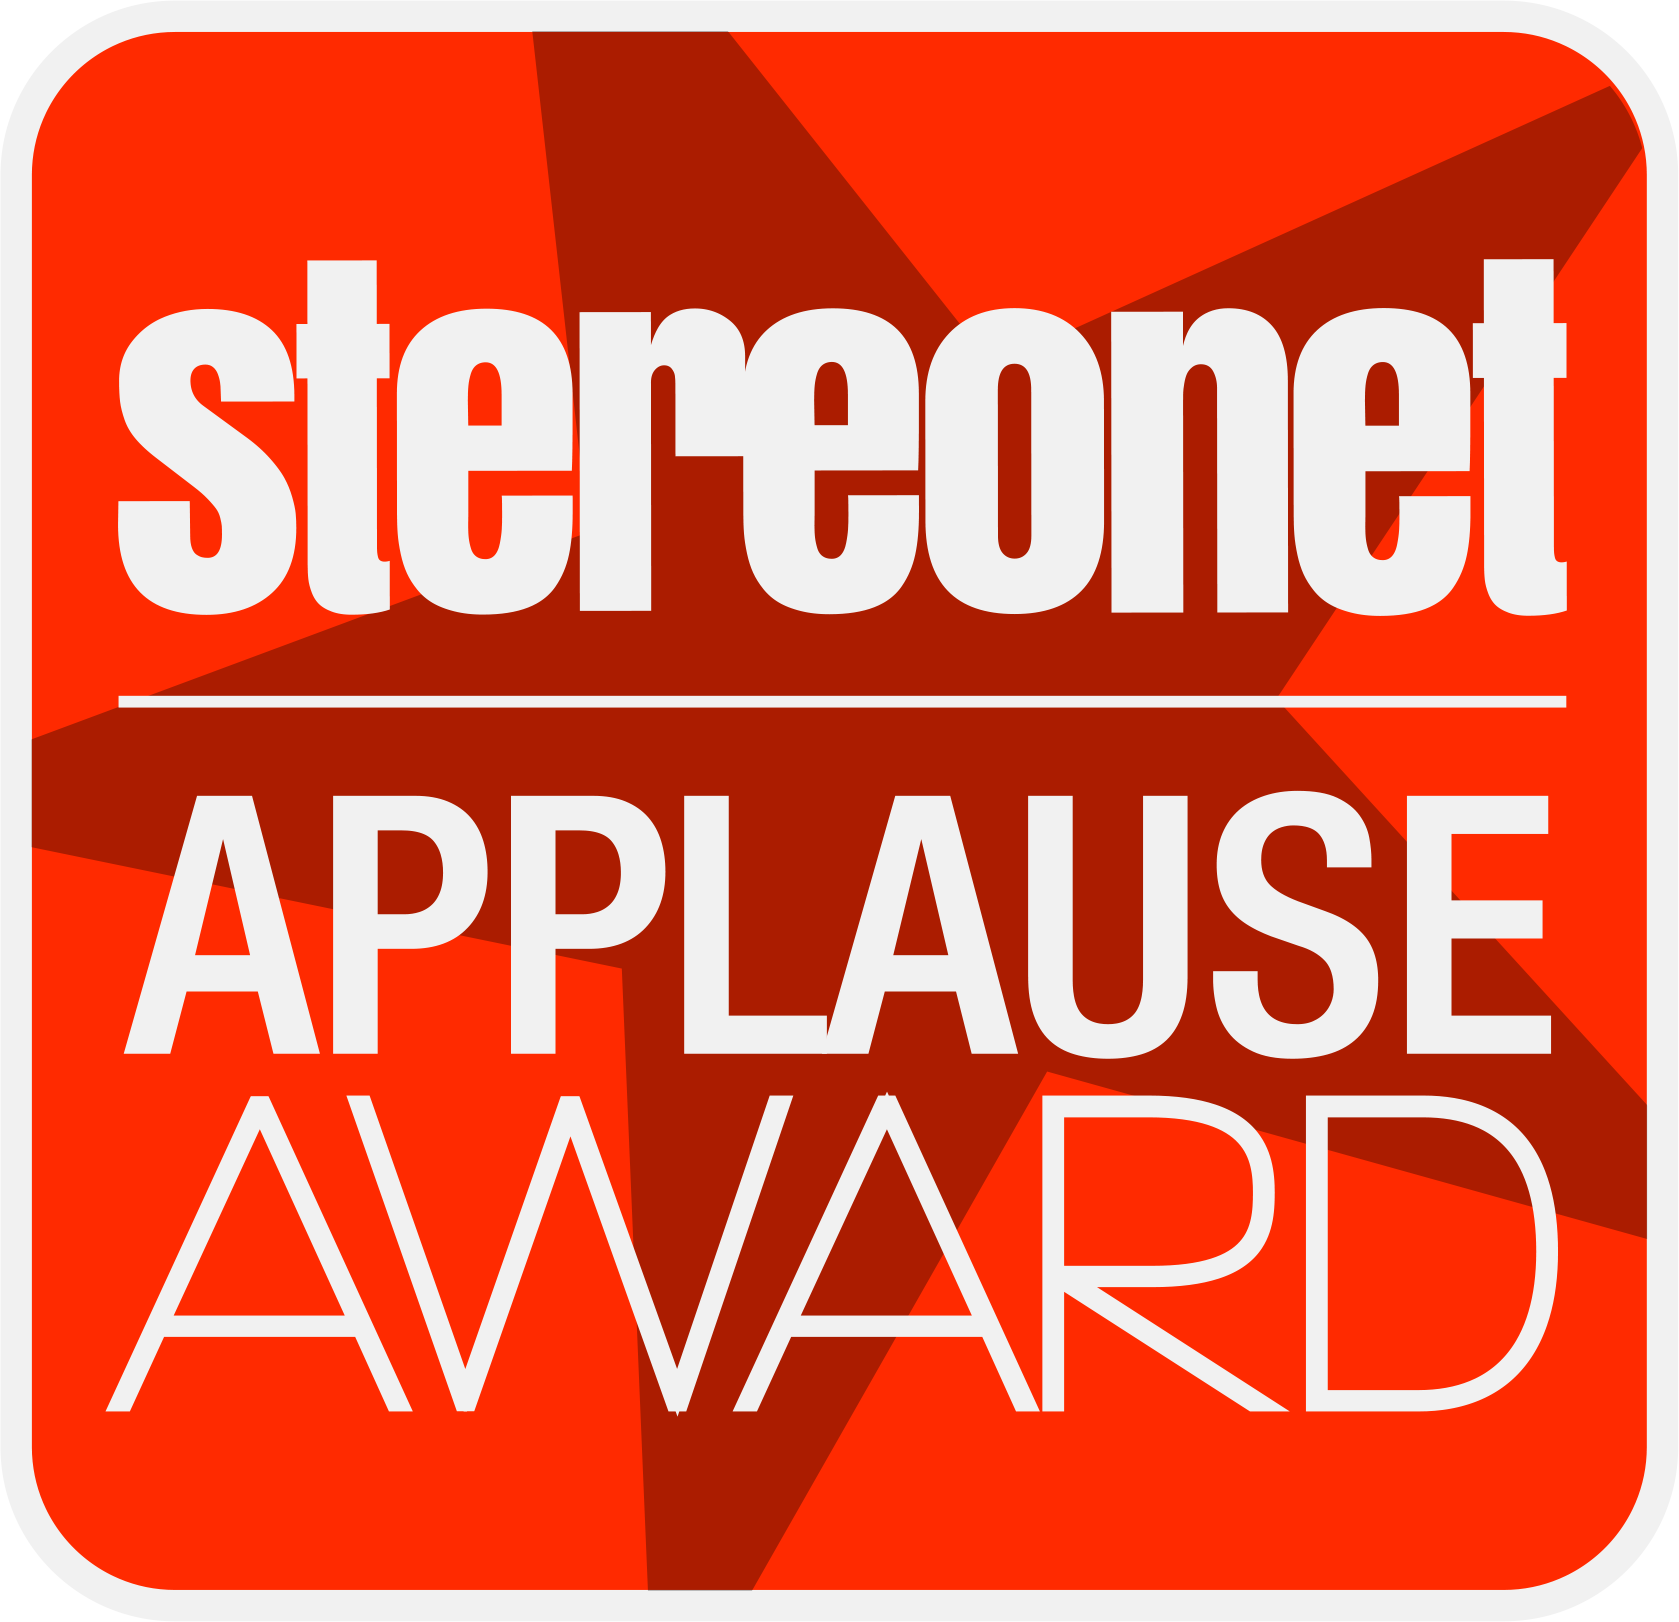 Stereonet Applause Award for Resolution Turntable